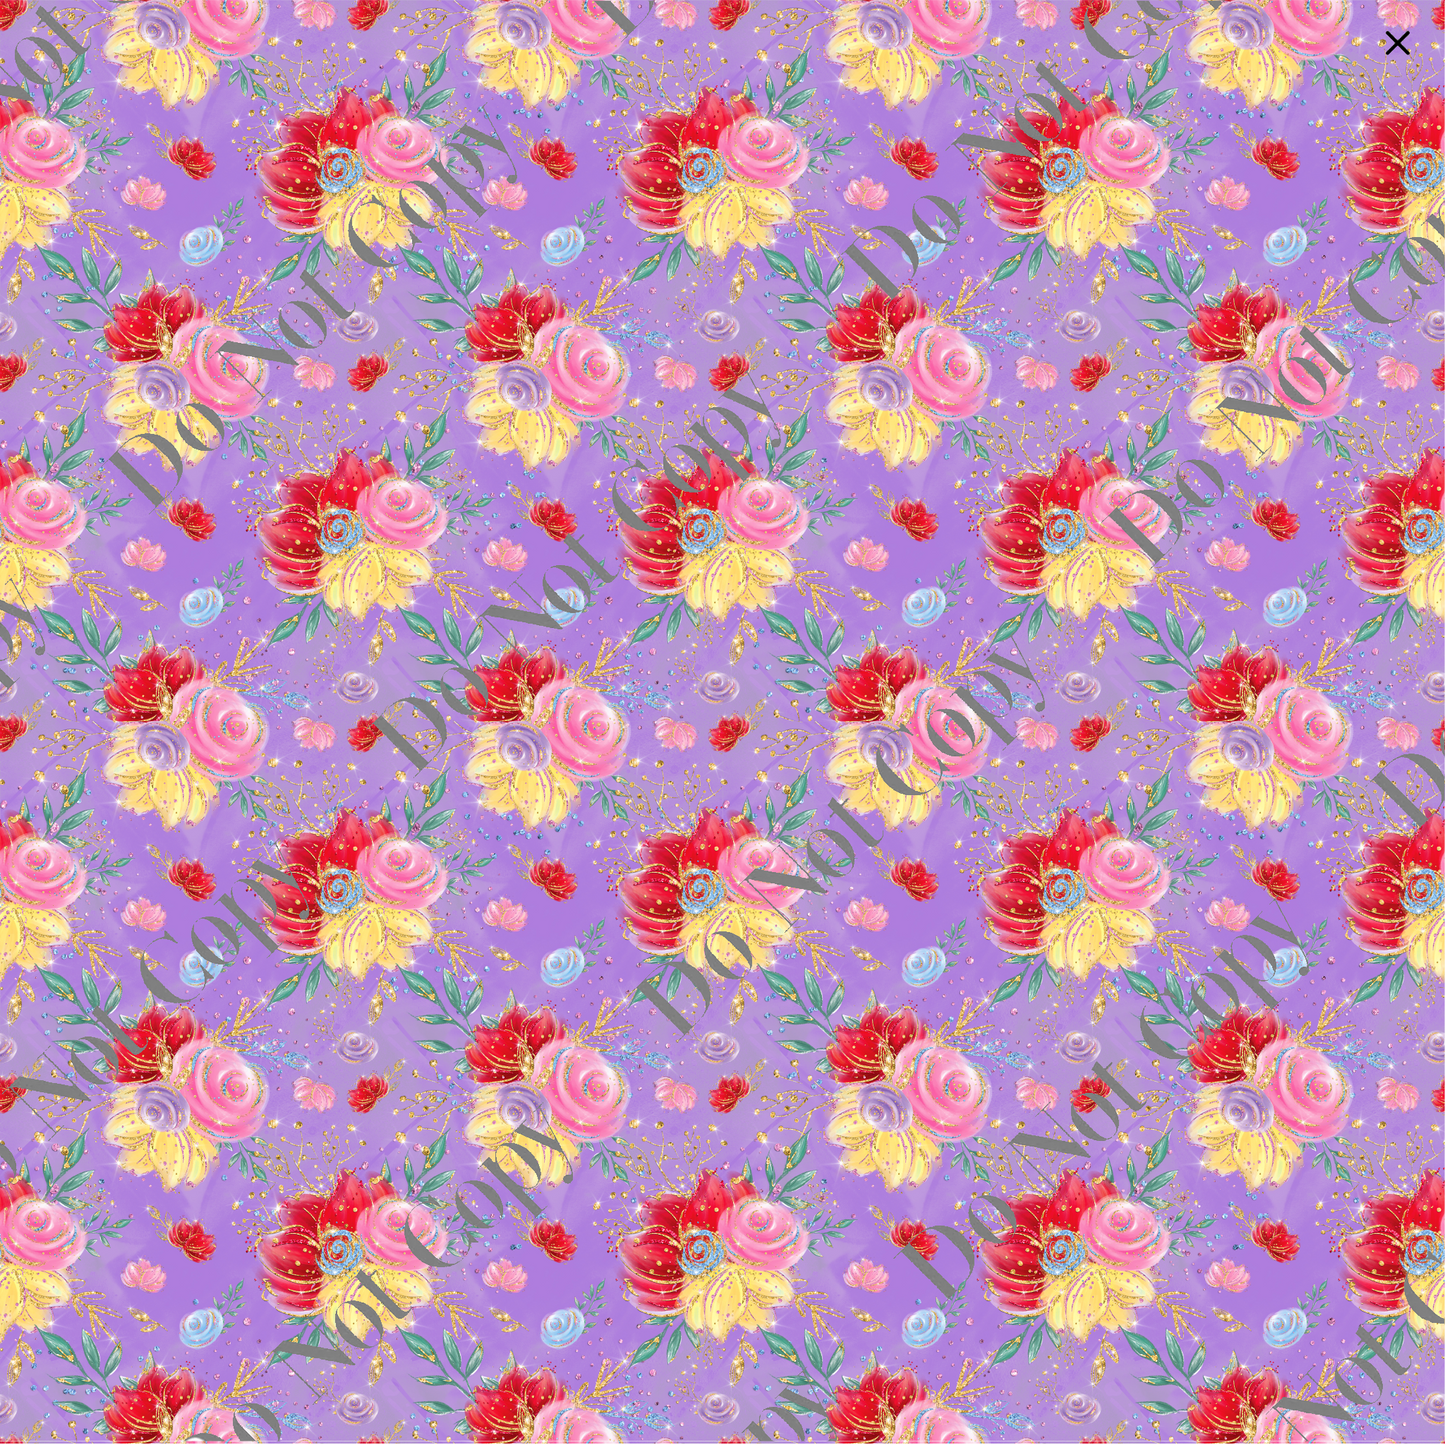 Patterned Vinyl - Red, Pink & Yellow Floral (purple)